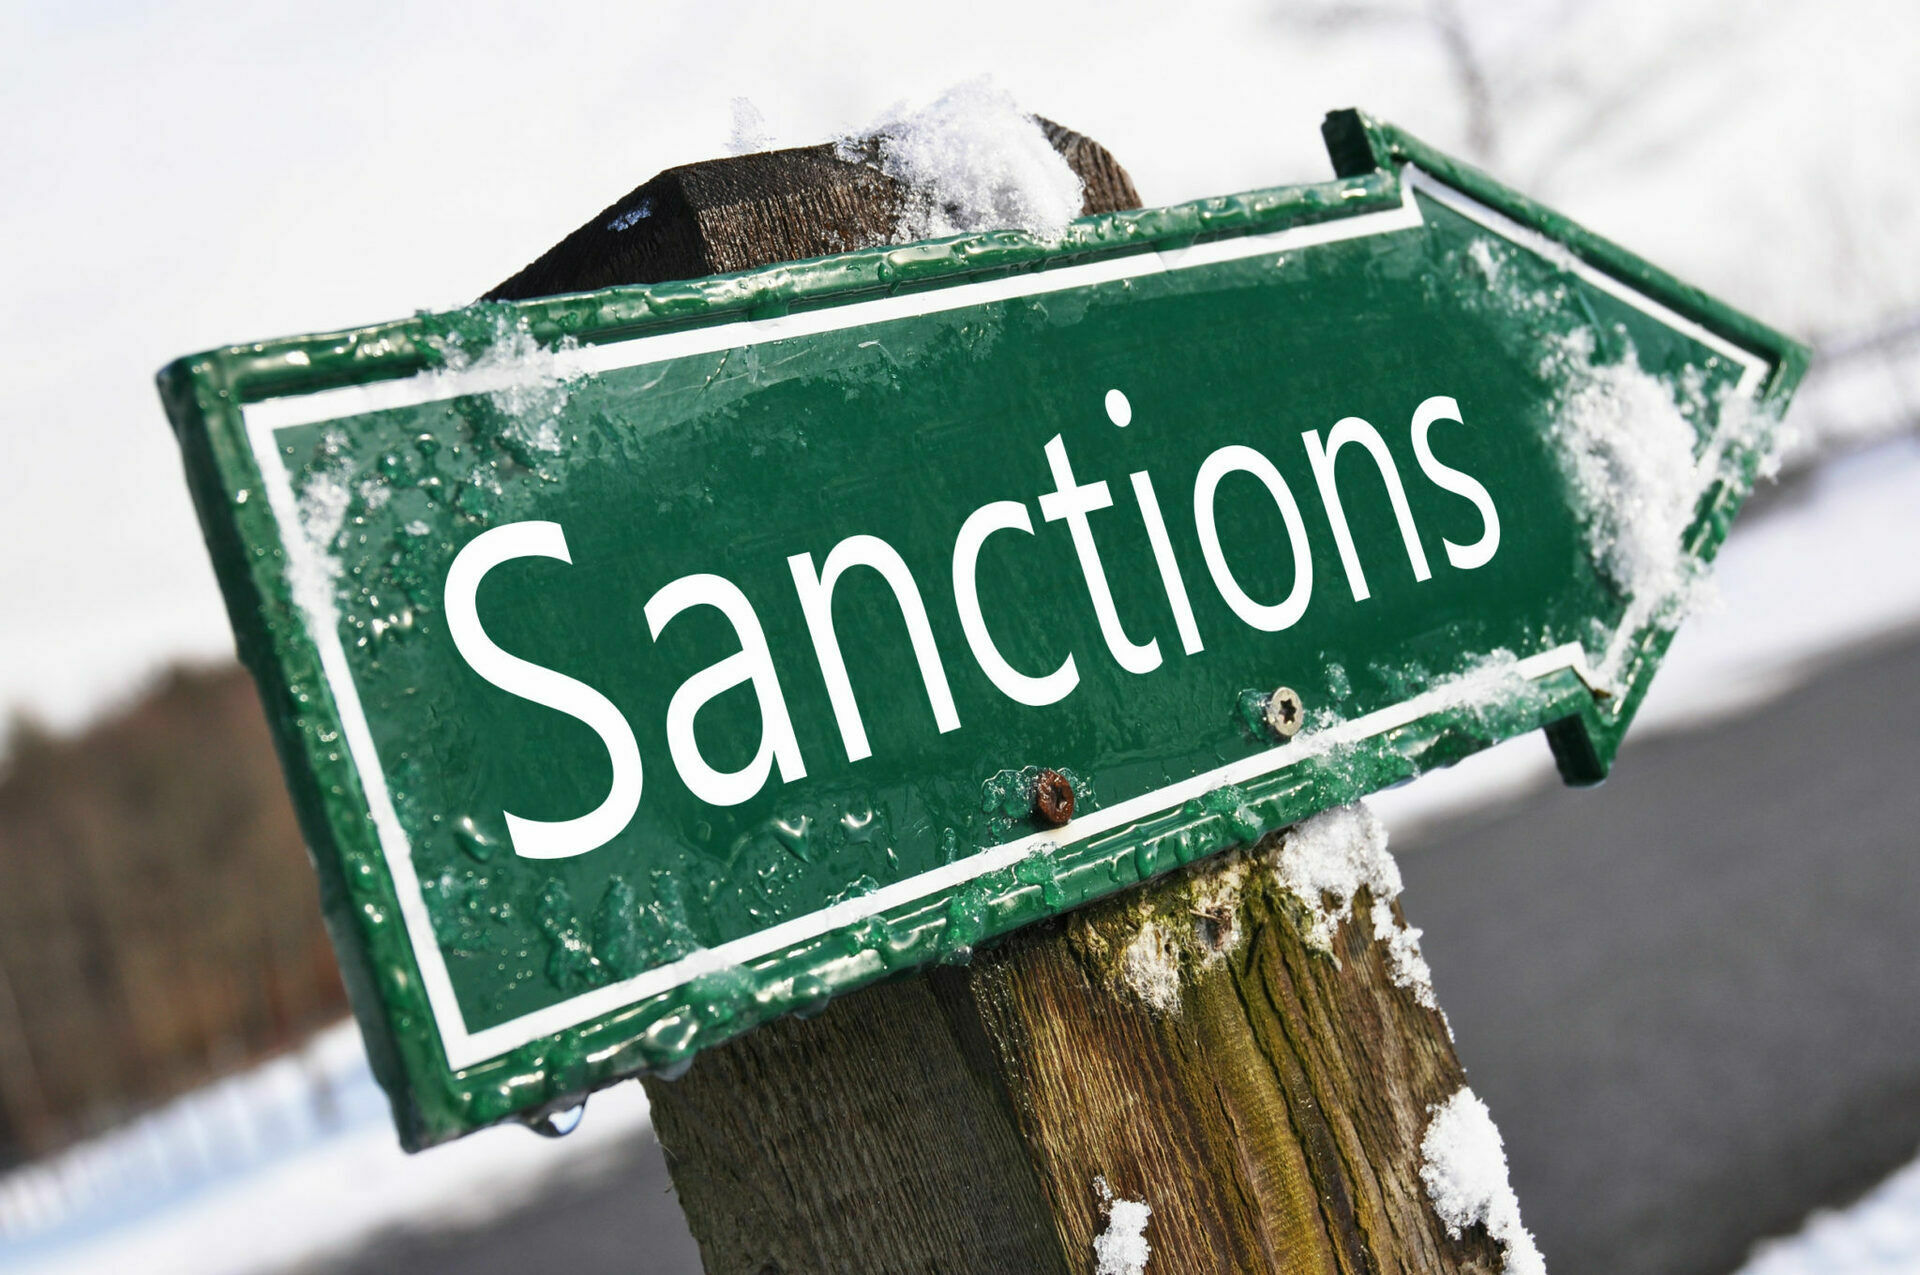 The European Union has published the sixth package of sanctions against Russia